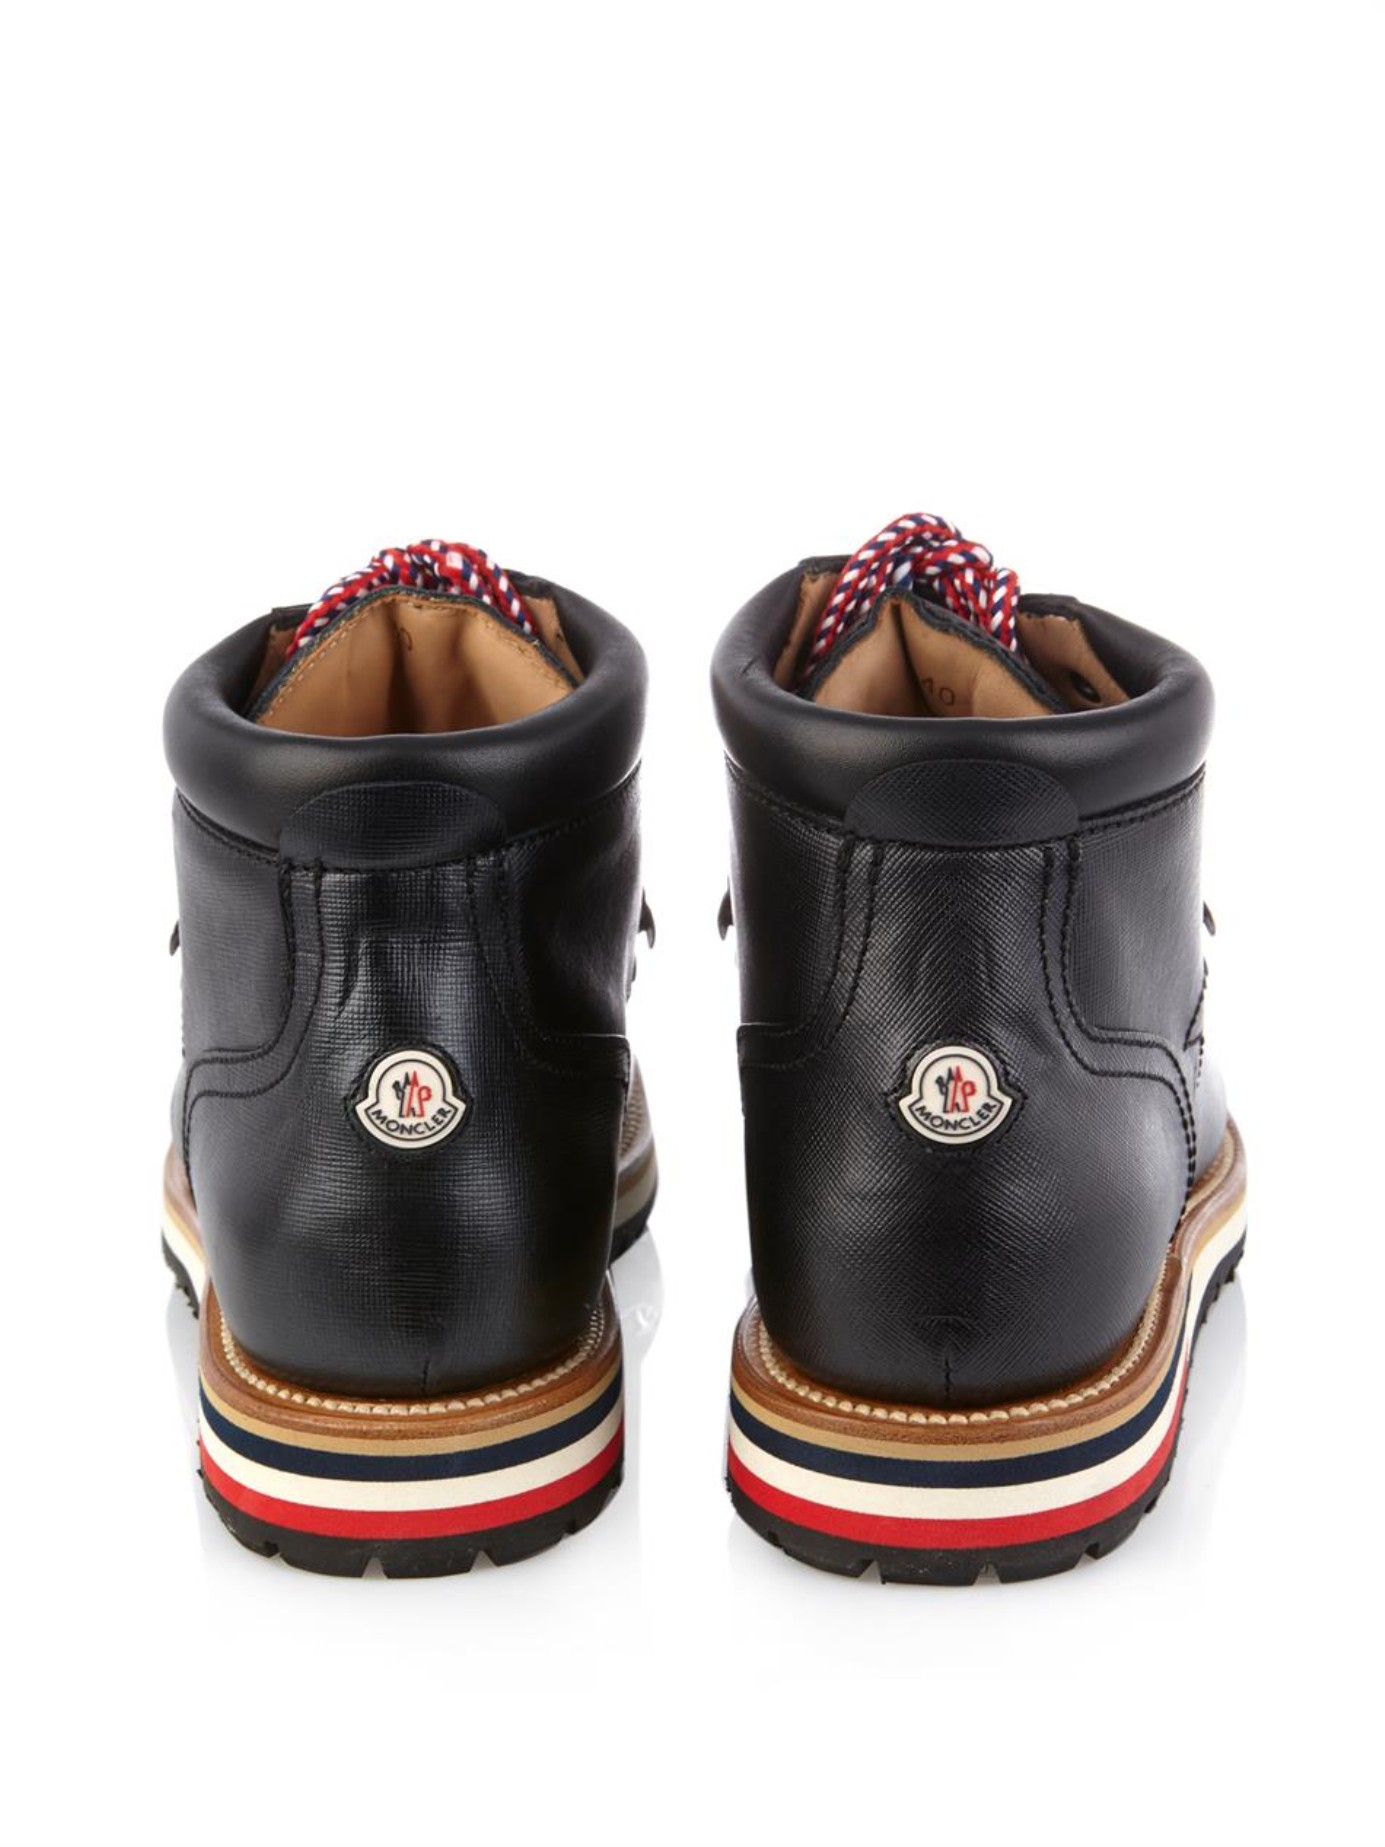 moncler ankle boots